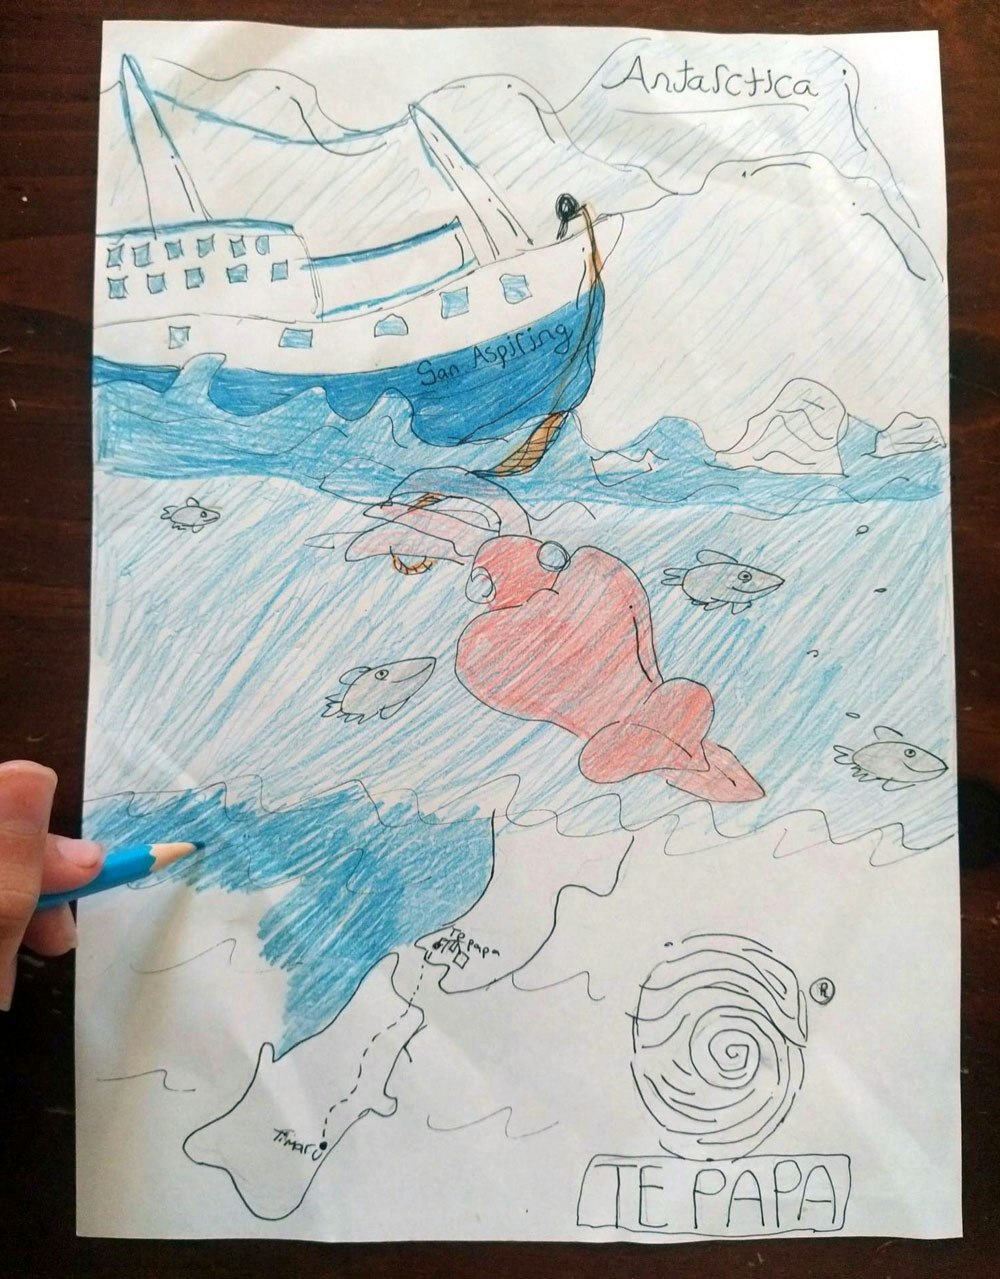 A drawing of the squid and a boat